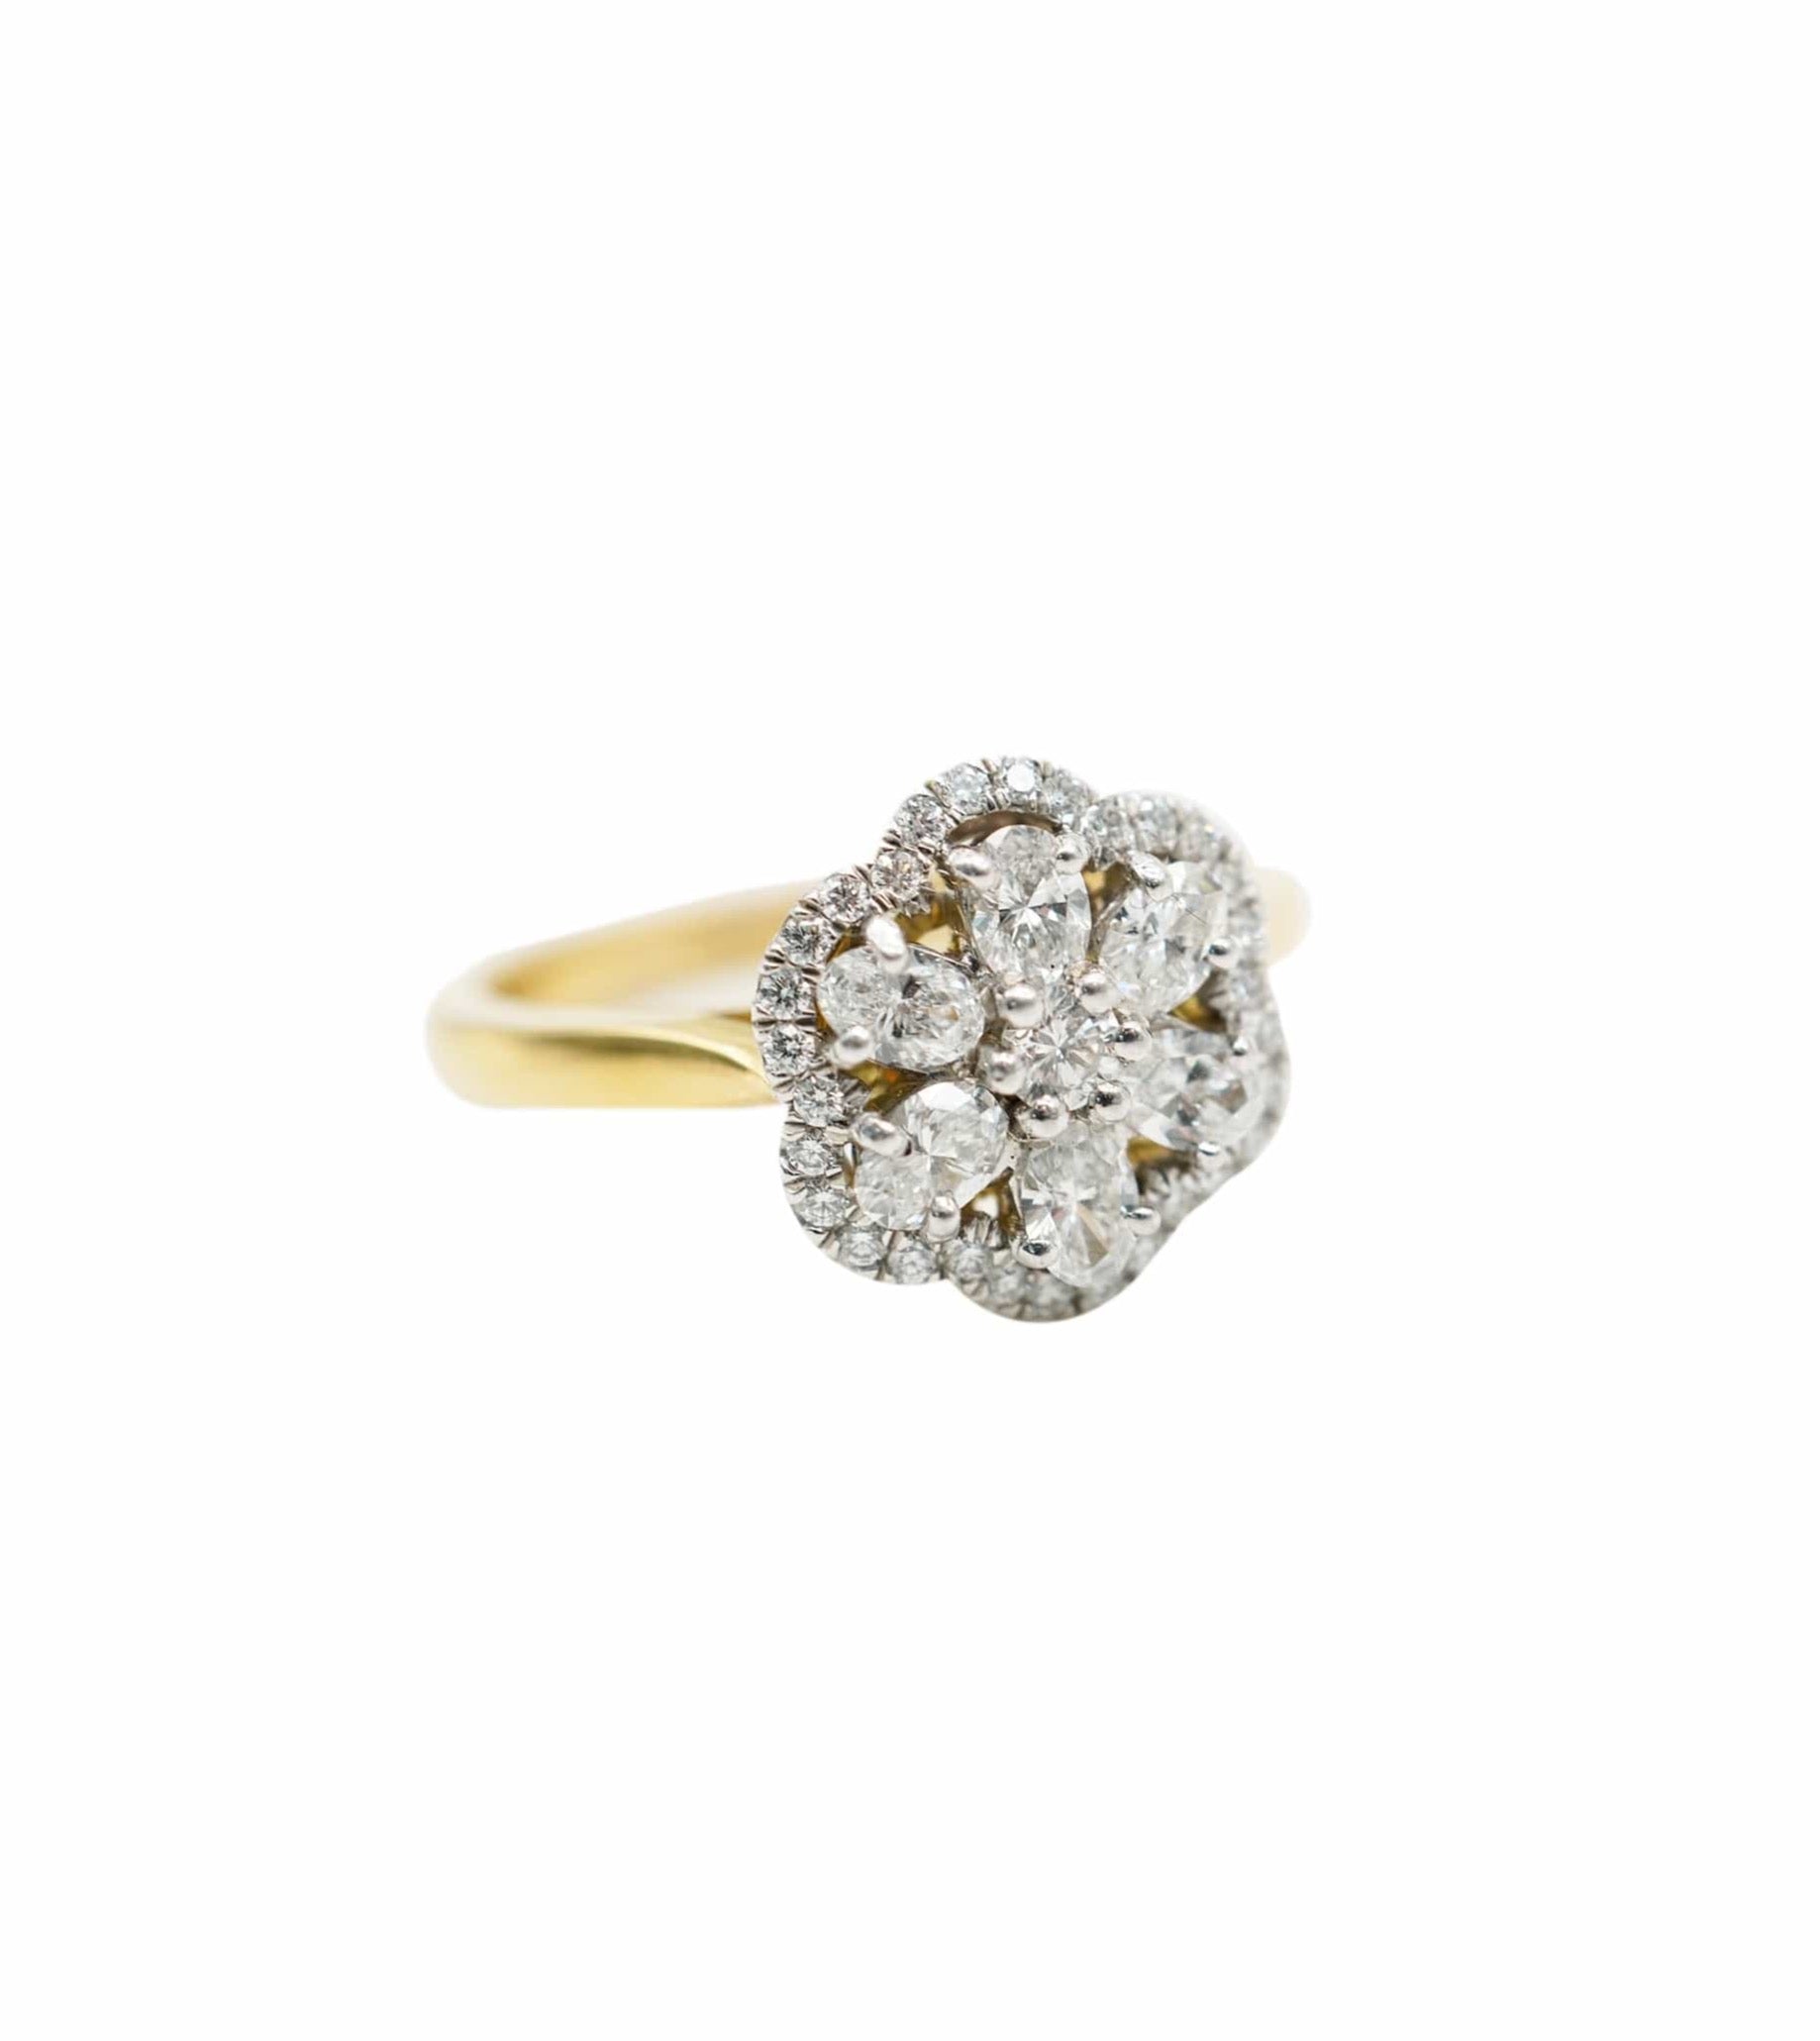 Luxury Promise Oval-cut diamond cluster ring 0.73 carat total 18K YG AHC1484